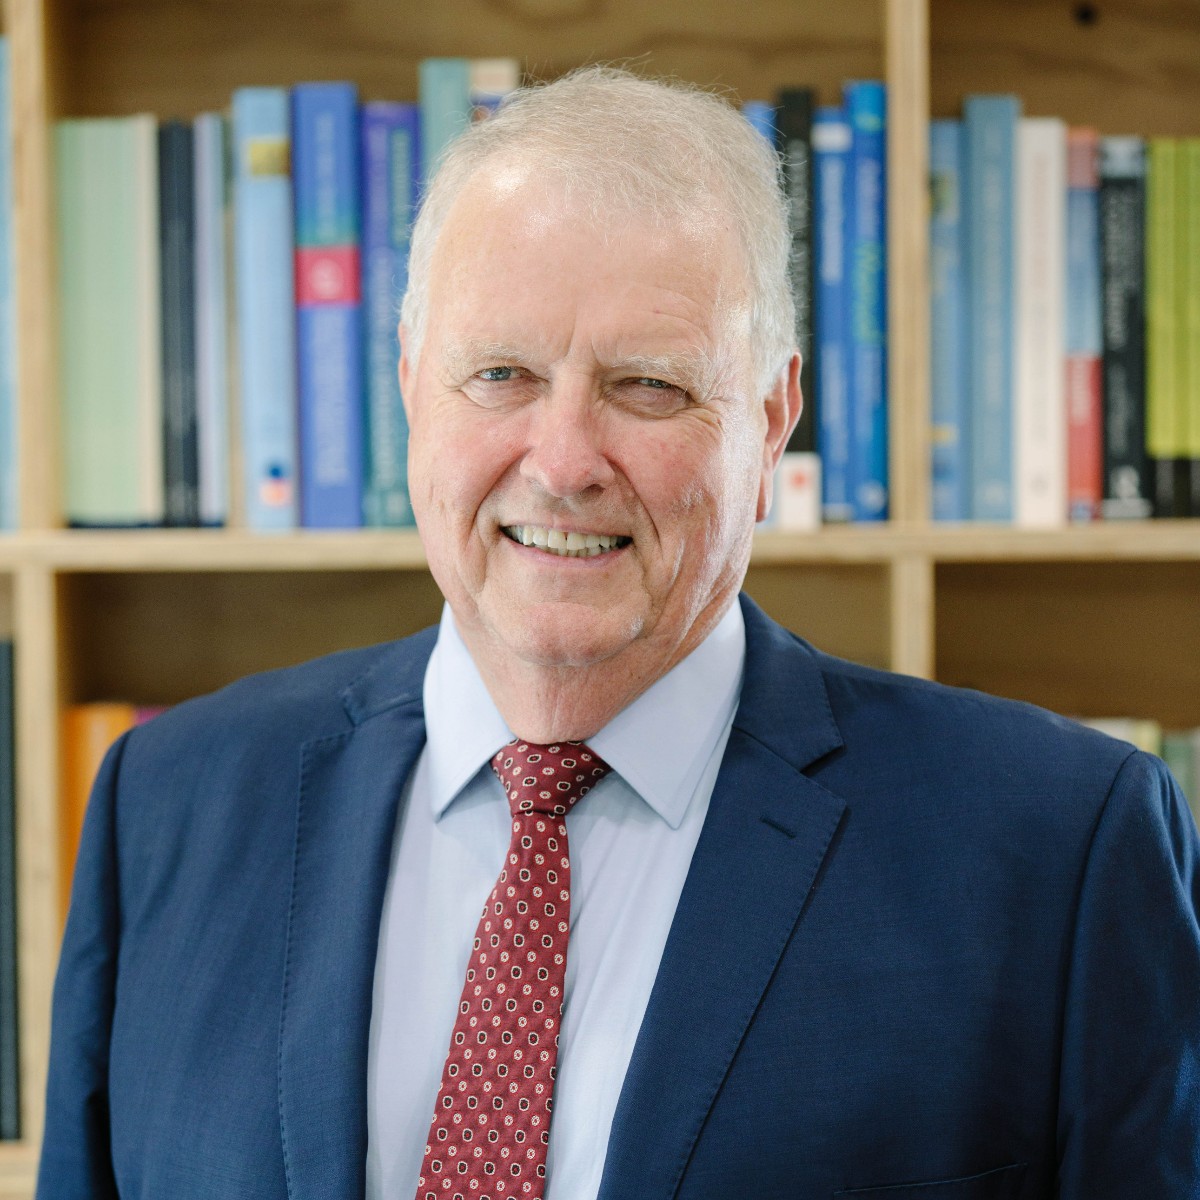 A big congratulations to #UQ's Professor Matt Sanders who has been recognised as a Highly Ranked Scholar by @ScholarGPS. The recognition is a celebration of top performers in their fields 👏 #UQPsychology #Psychology #AcademicExcellence #HighlyRankedScholar @DrMattSanders